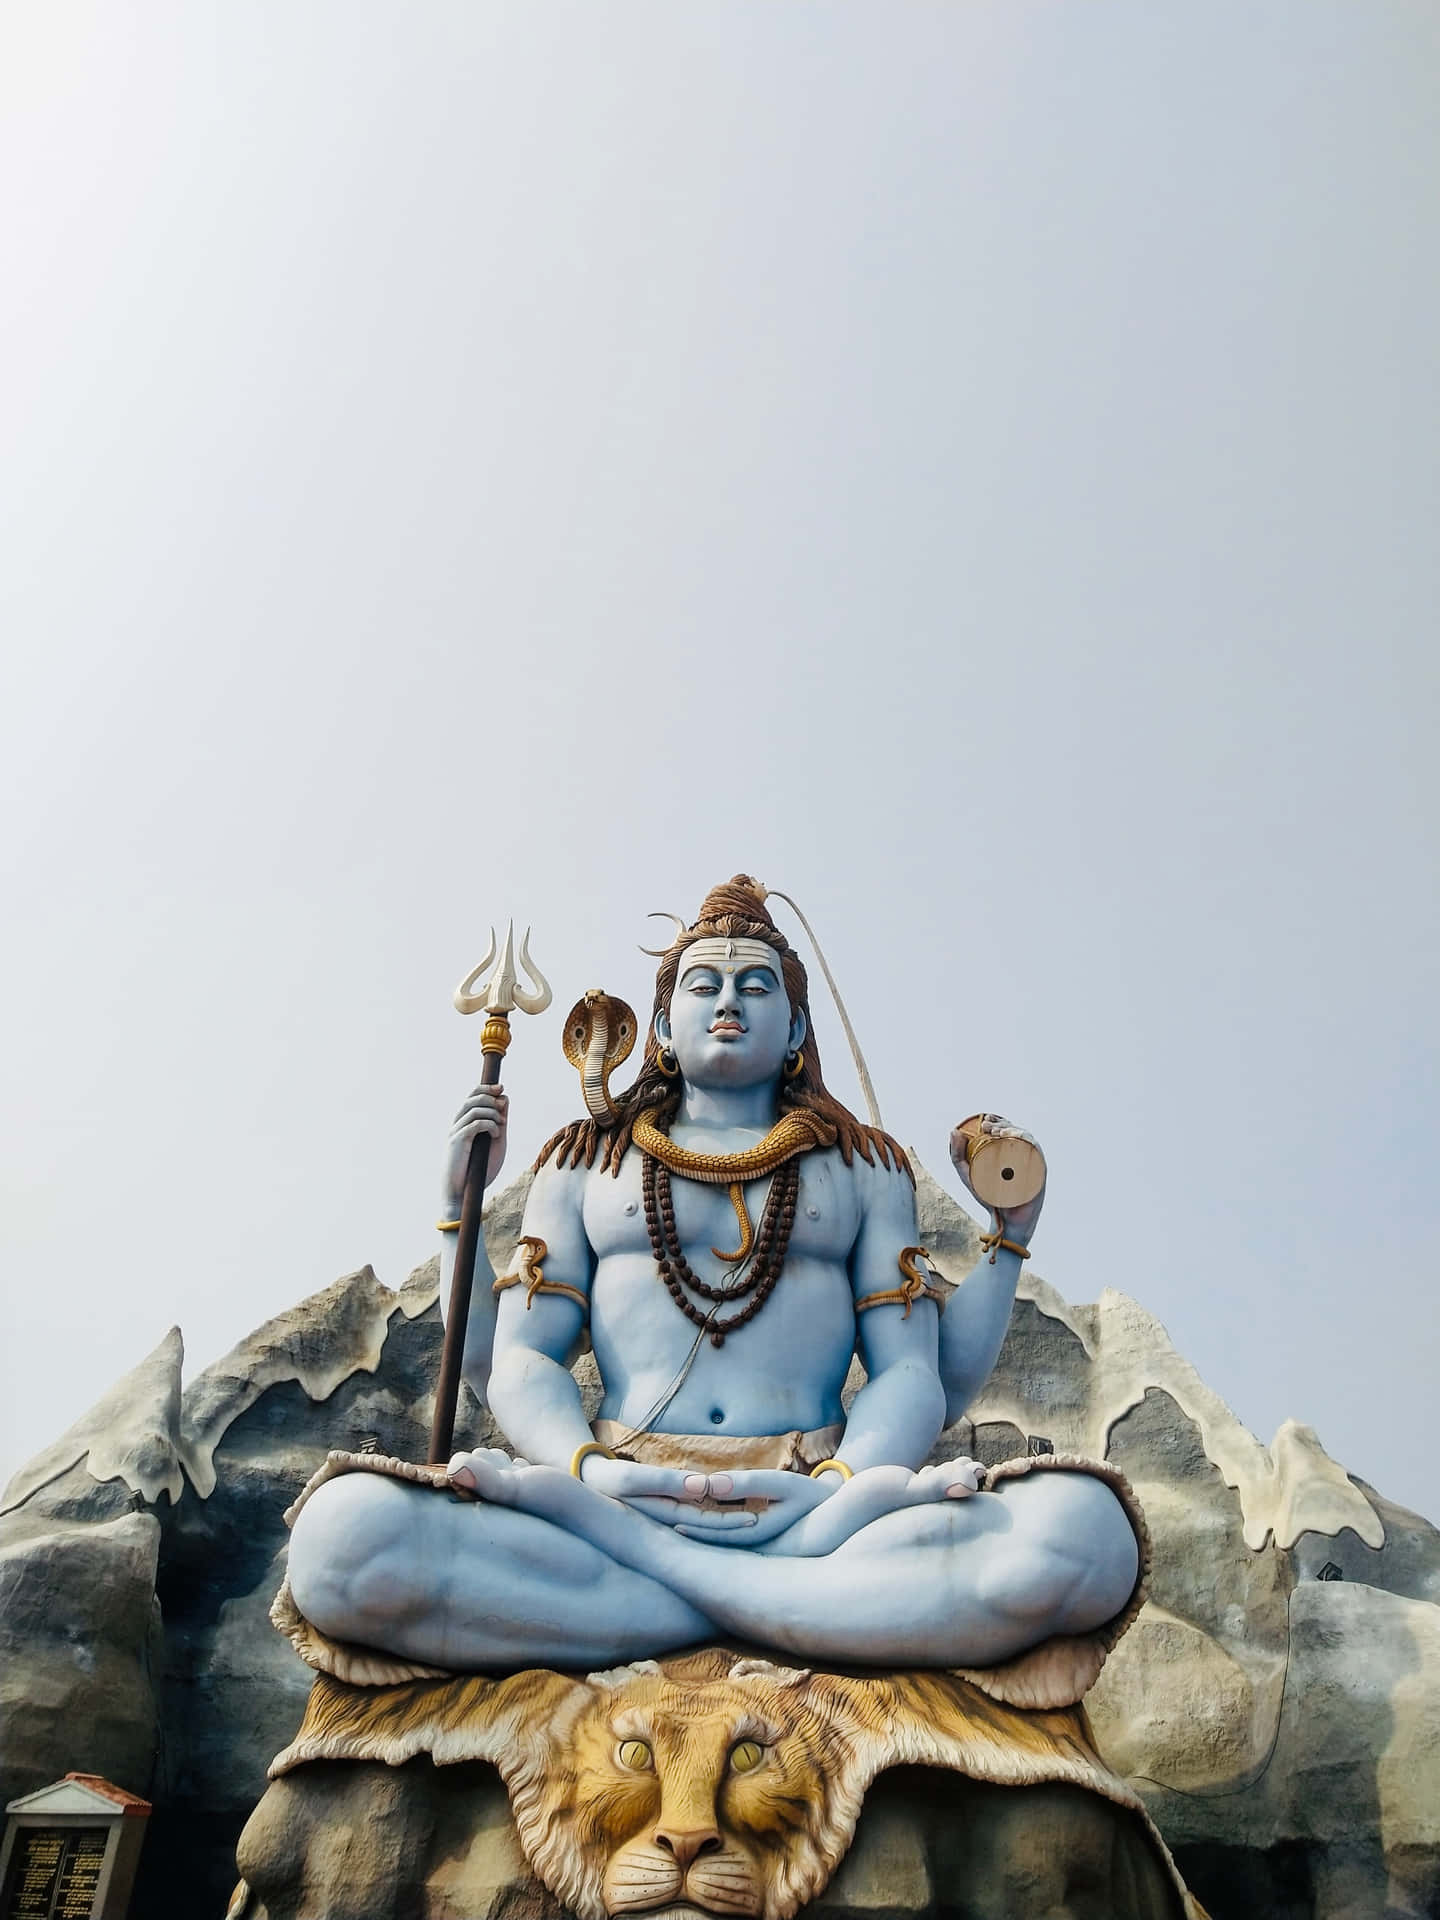 Adoring Lord Shiva, the Supreme being